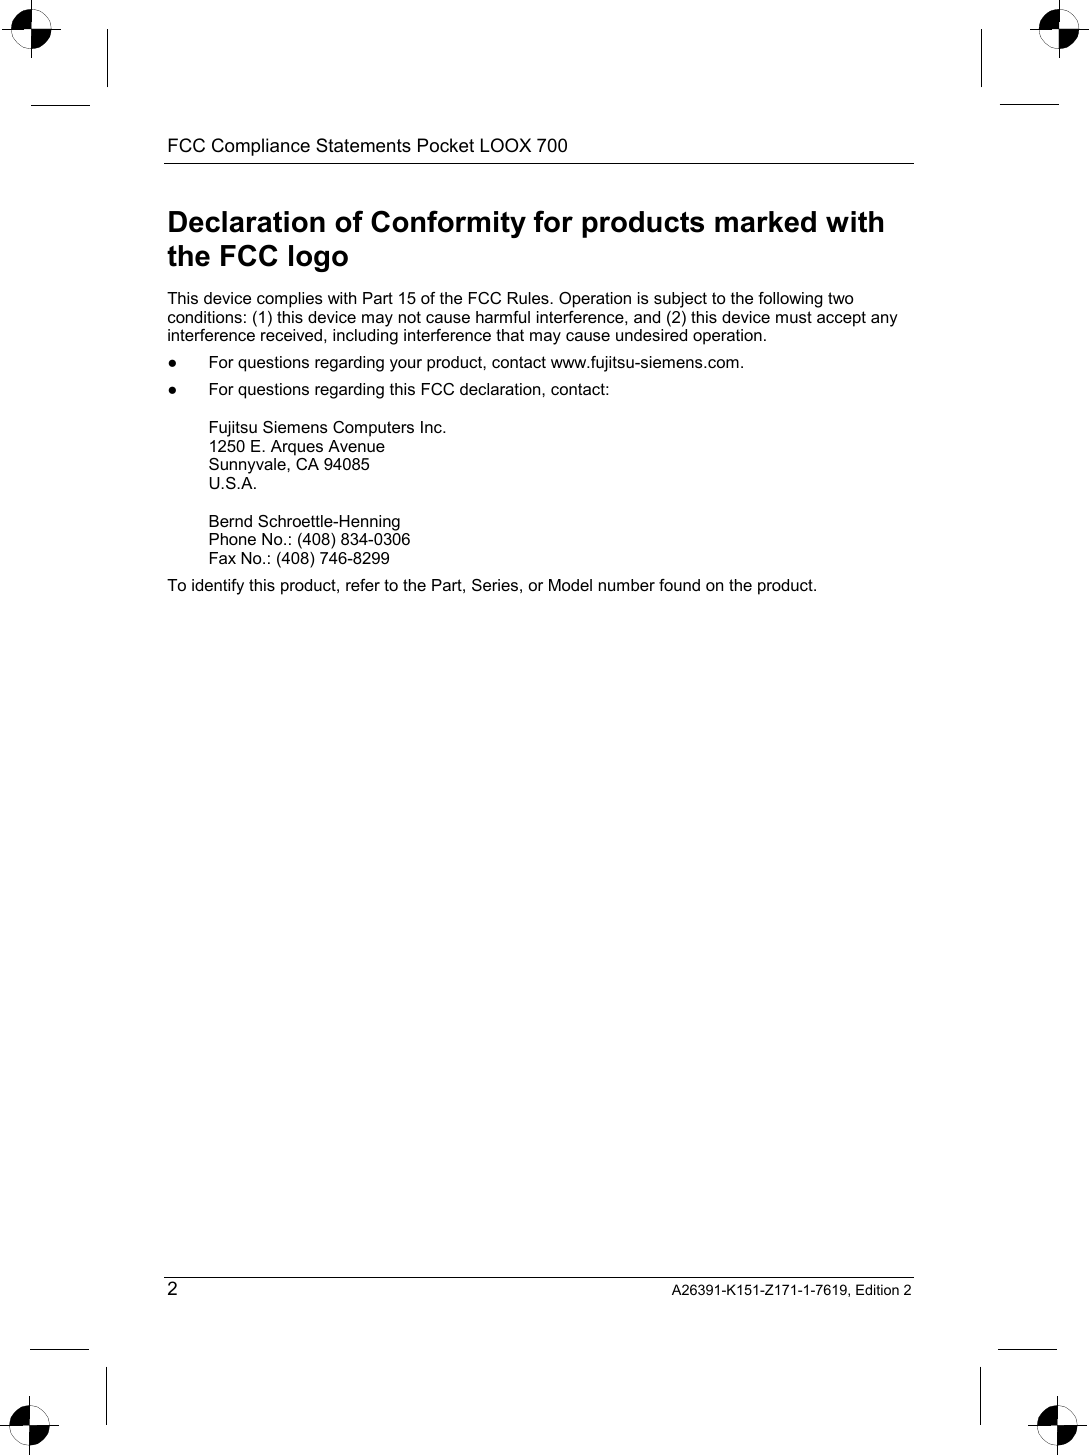 FCC Compliance Statements Pocket LOOX 700   2 A26391-K151-Z171-1-7619, Edition 2 Declaration of Conformity for products marked with the FCC logo This device complies with Part 15 of the FCC Rules. Operation is subject to the following two conditions: (1) this device may not cause harmful interference, and (2) this device must accept any interference received, including interference that may cause undesired operation. ●  For questions regarding your product, contact www.fujitsu-siemens.com. ●  For questions regarding this FCC declaration, contact:  Fujitsu Siemens Computers Inc. 1250 E. Arques Avenue Sunnyvale, CA 94085 U.S.A.   Bernd Schroettle-Henning Phone No.: (408) 834-0306 Fax No.: (408) 746-8299 To identify this product, refer to the Part, Series, or Model number found on the product. 